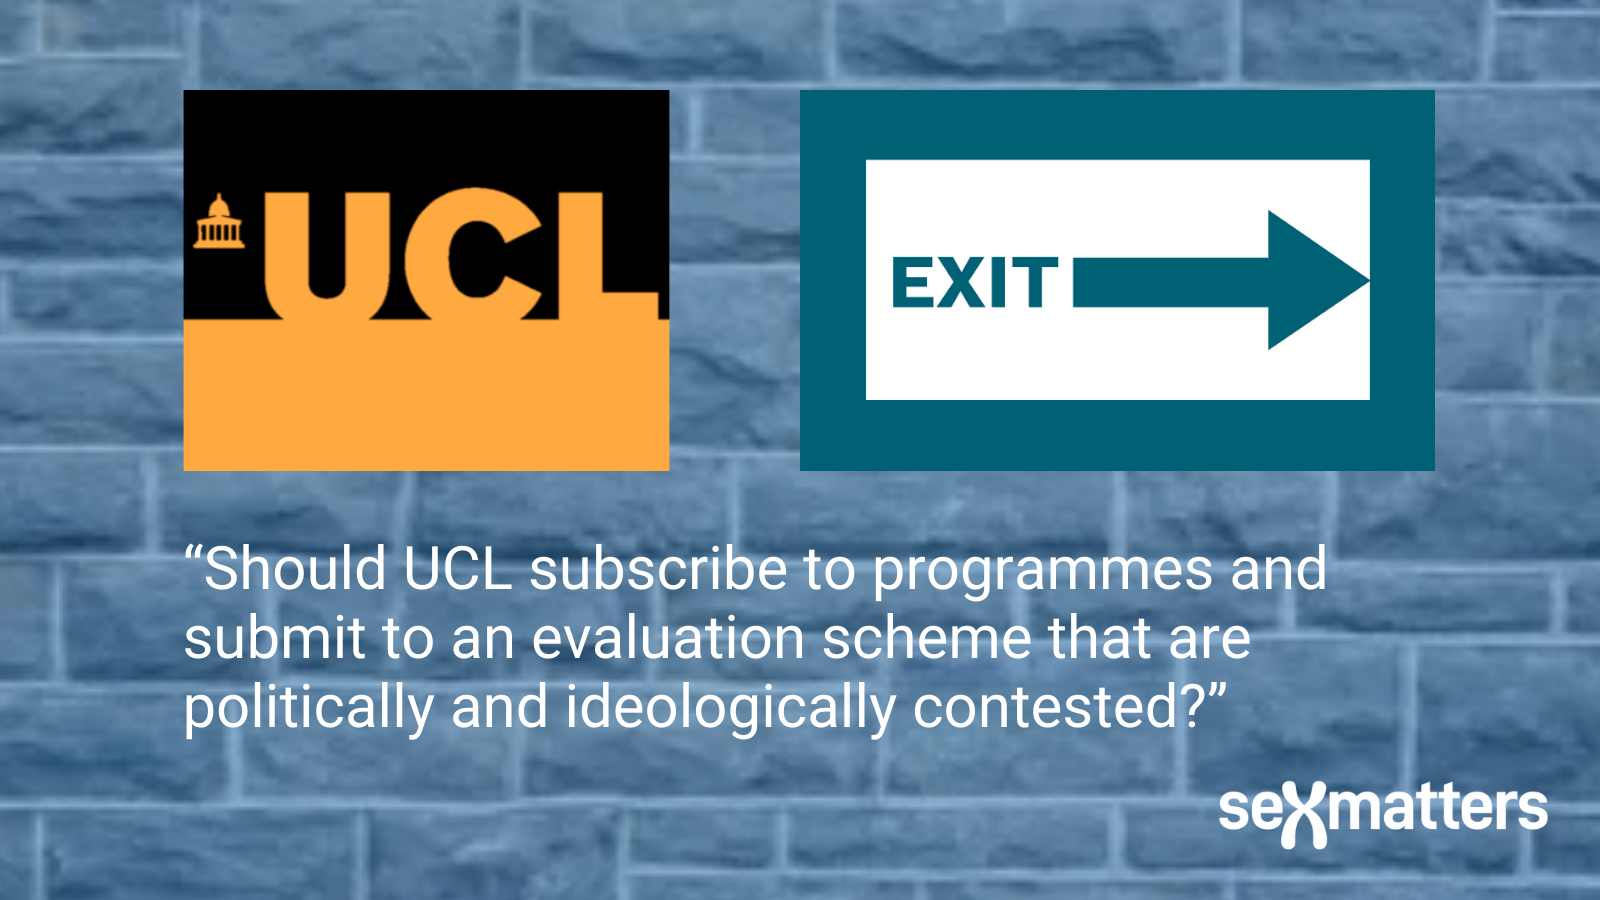 “Should UCL subscribe to programmes and submit to an evaluation scheme that are politically and ideologically contested?”